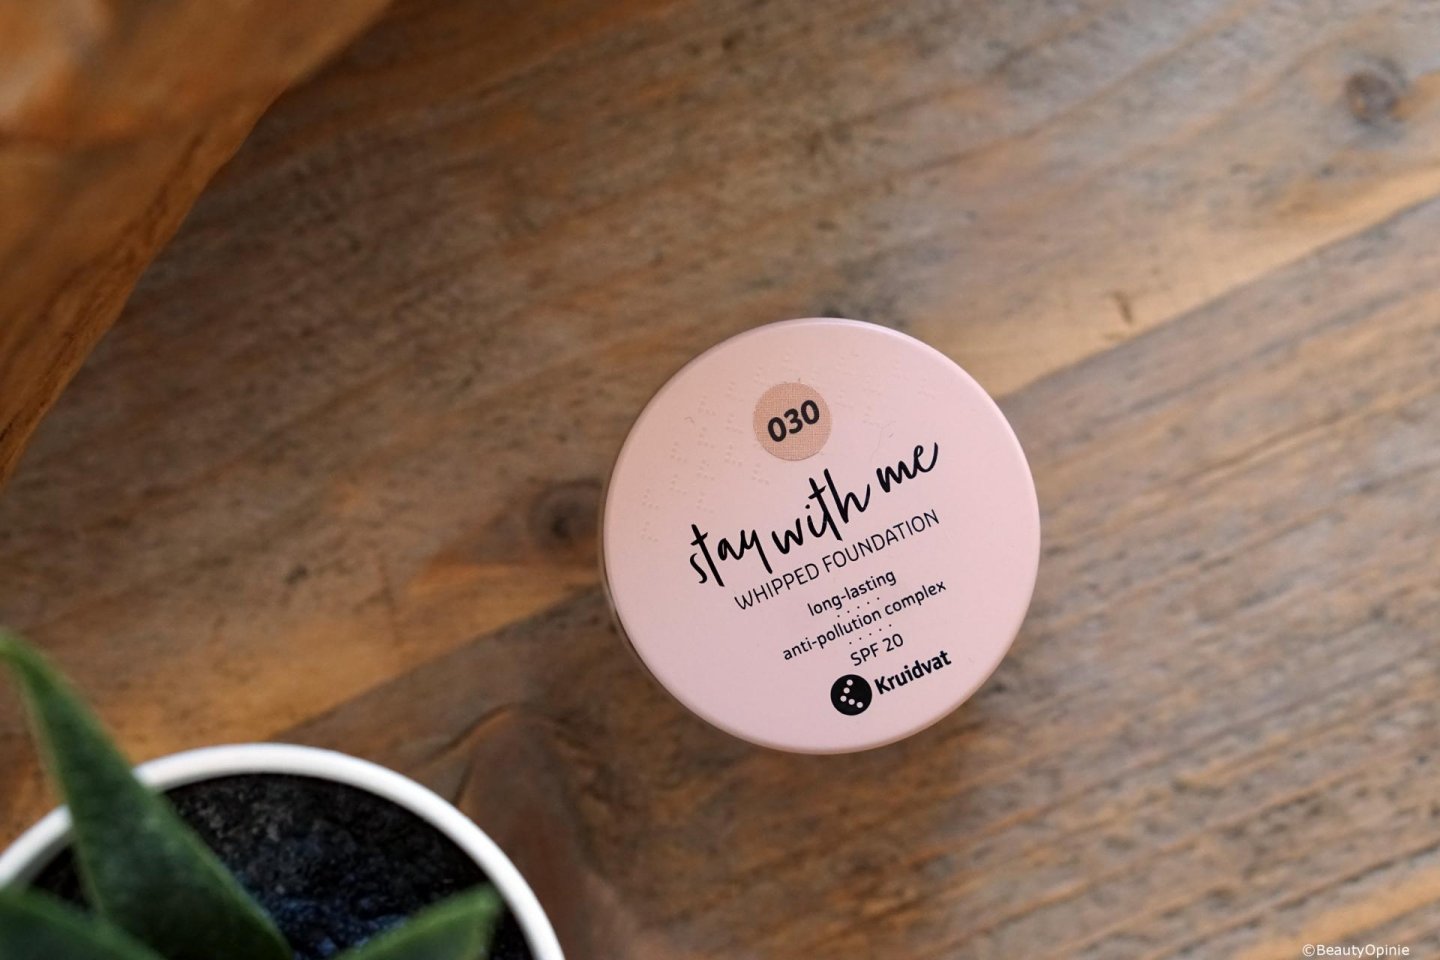 Review Kruidvat Stay With Me Whipped Foundation